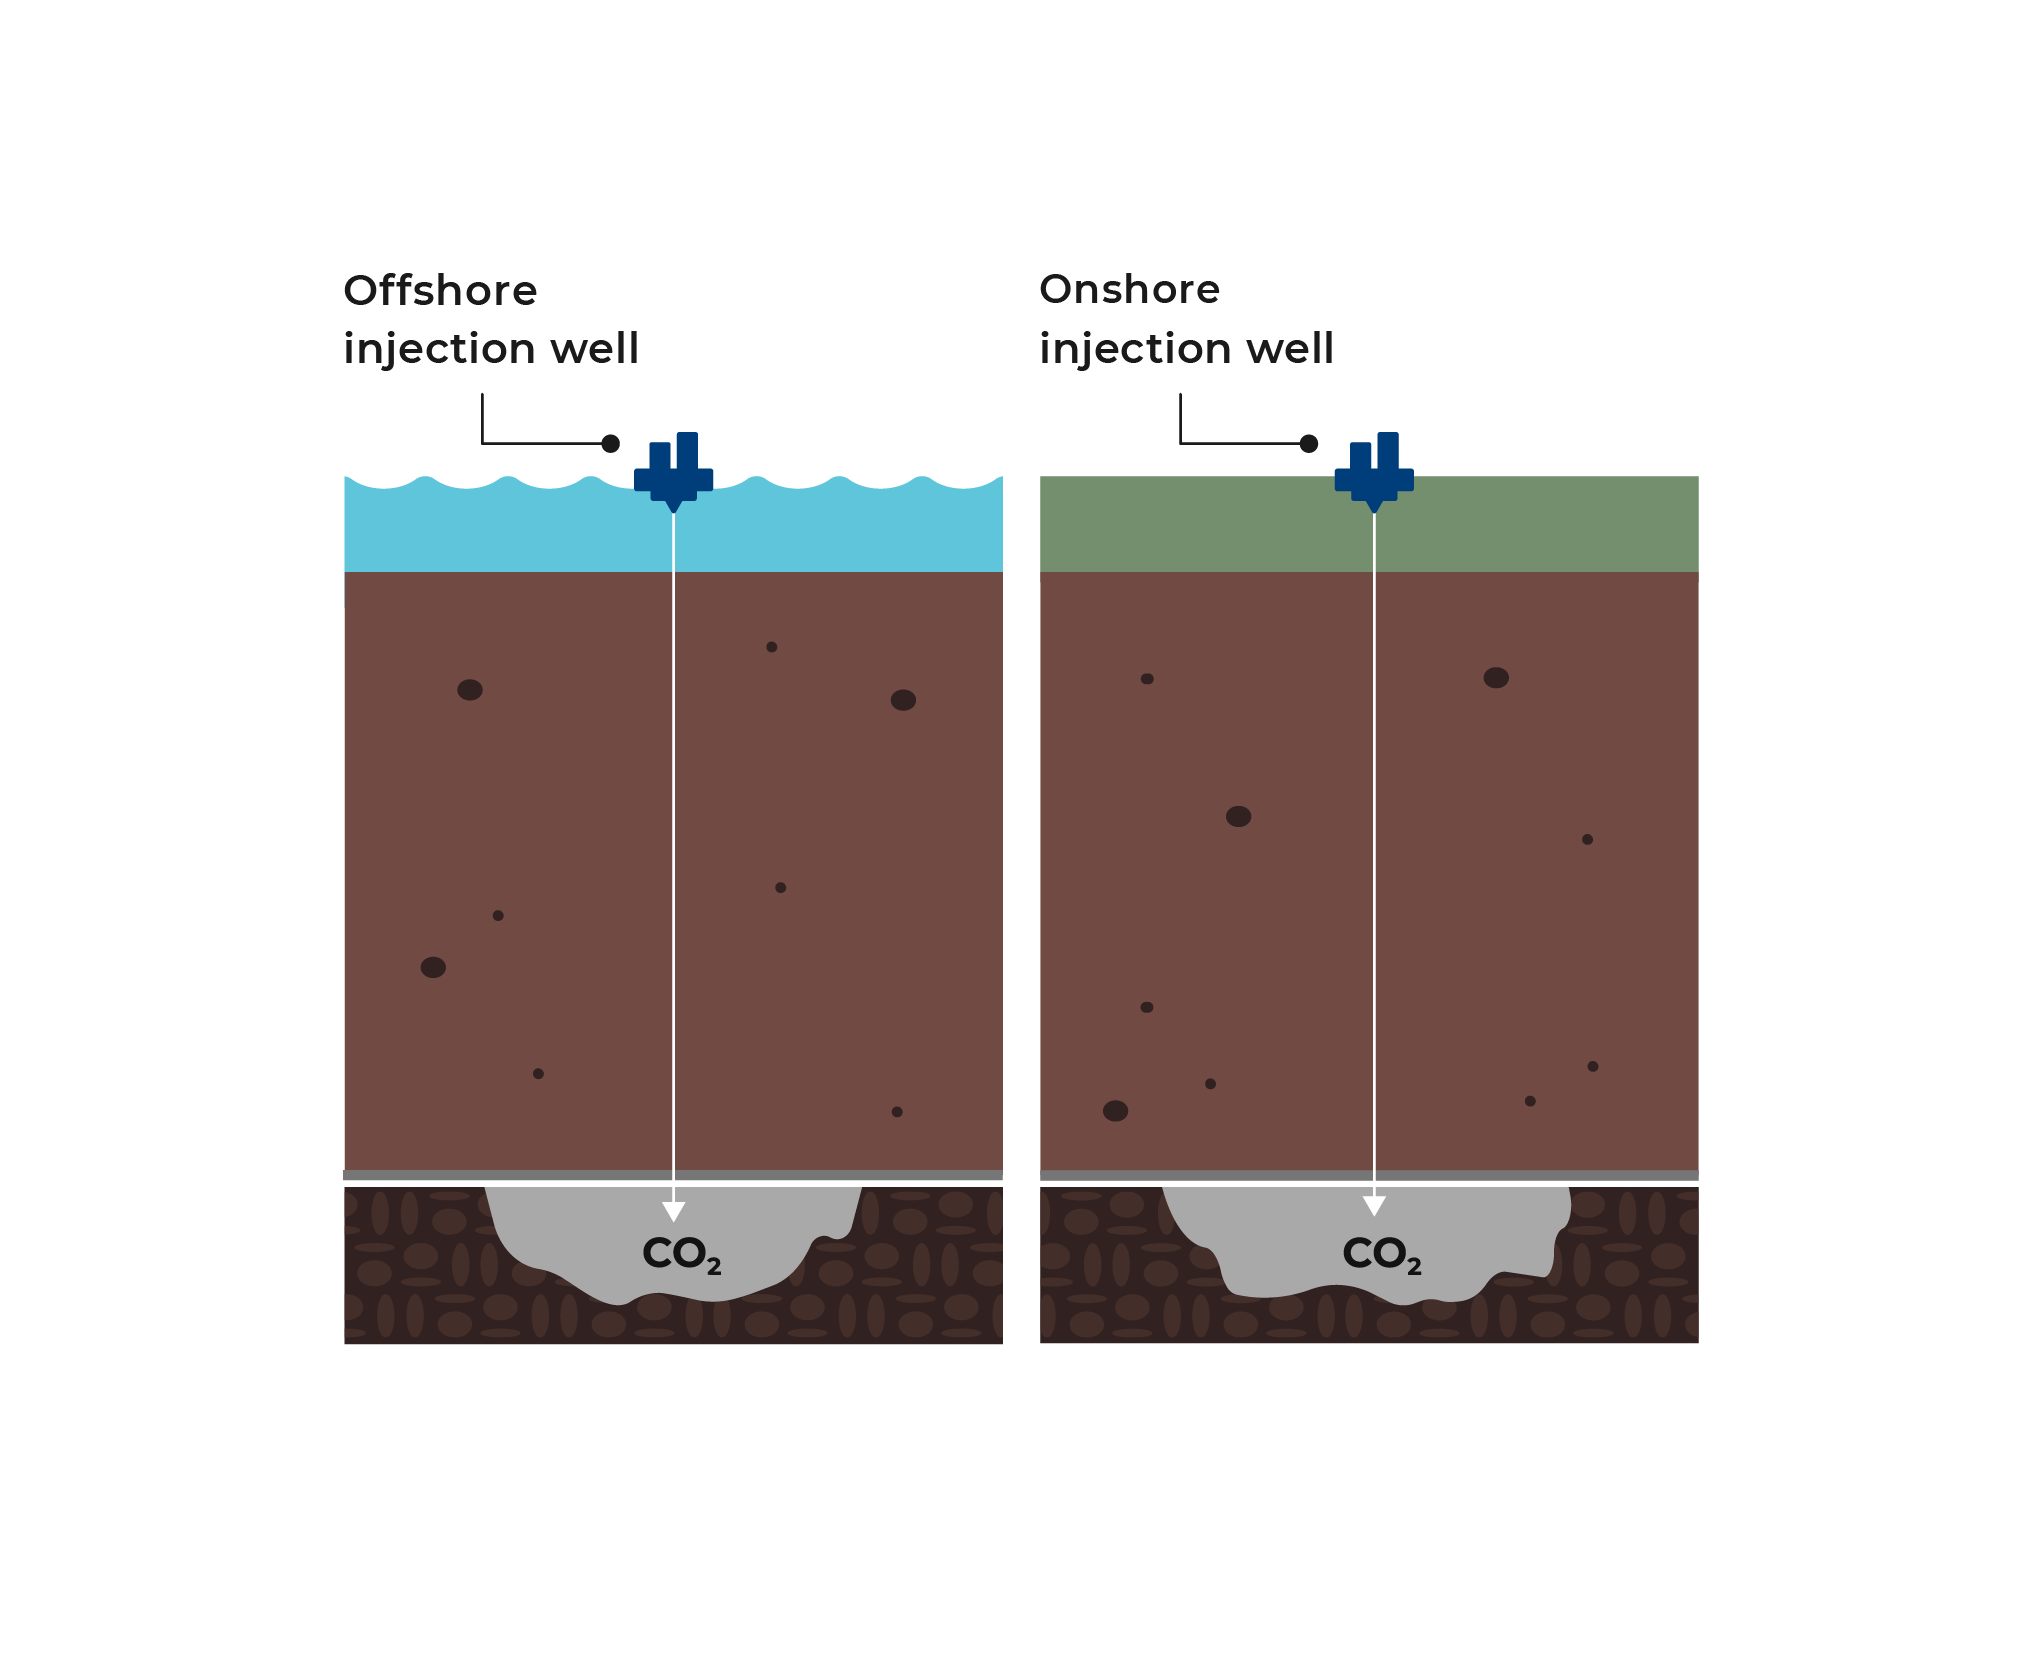 CO₂ injection well diagram comparing onshore and offshore